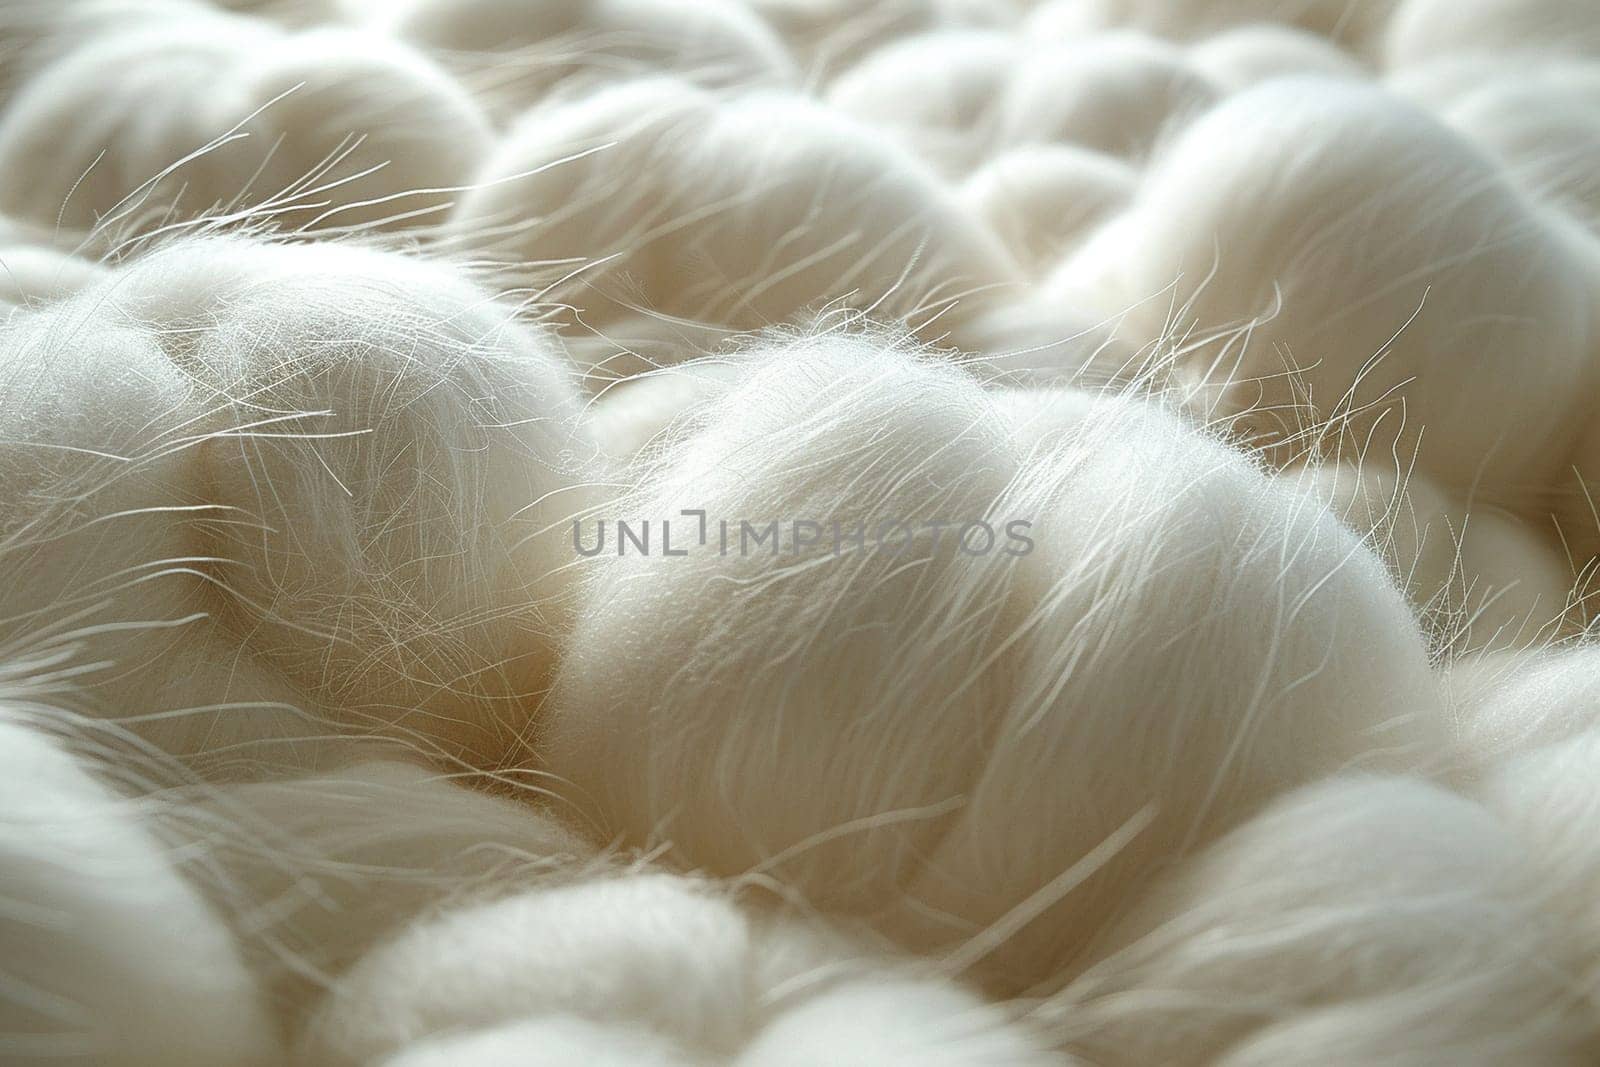 Close-up of fluffy cotton balls, suitable for soft and natural backgrounds.